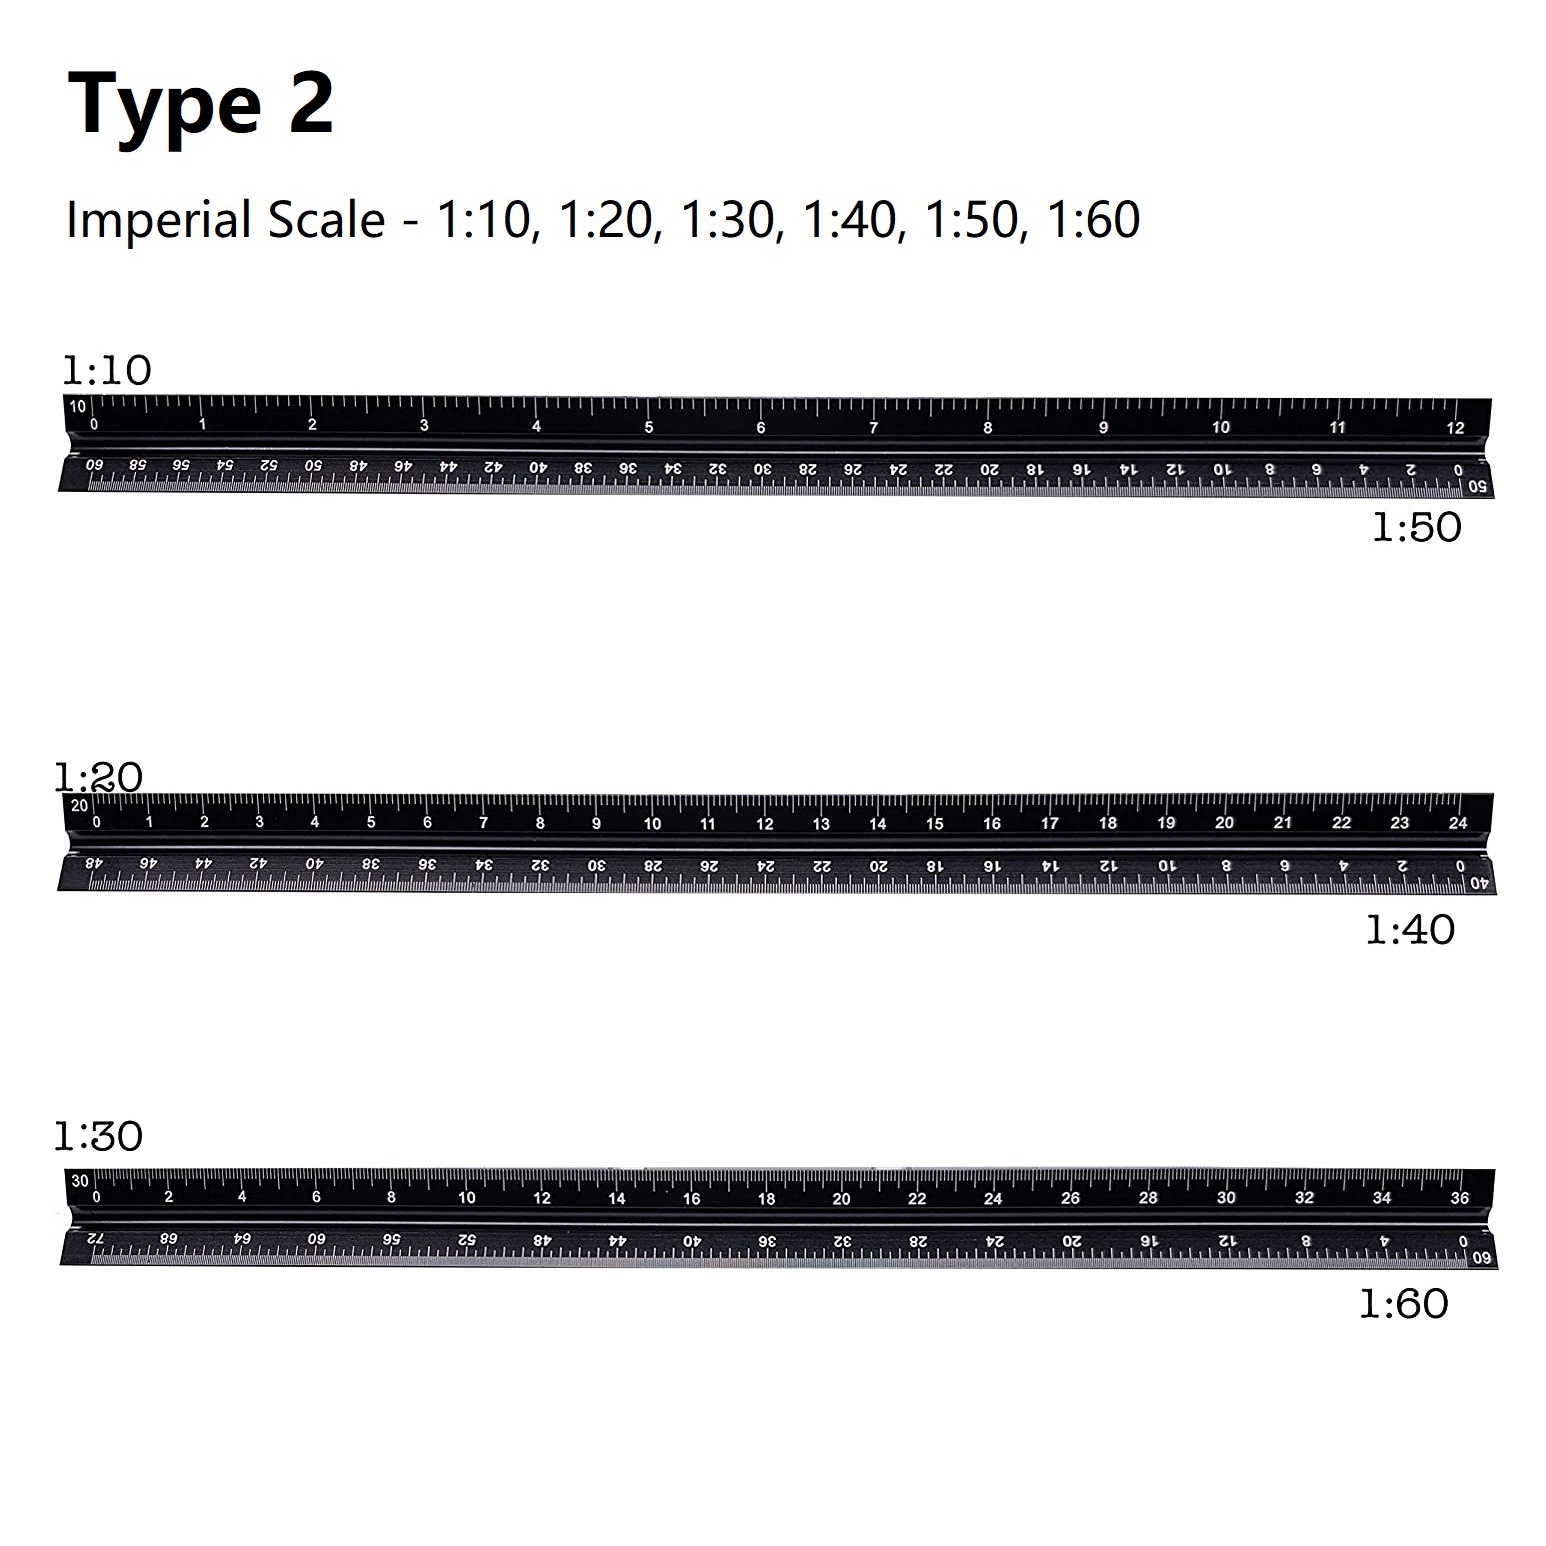 WEN ME333R 12 in. Aluminum Triangular Architect Ruler with Laser-etched Imperial Drafting Scales